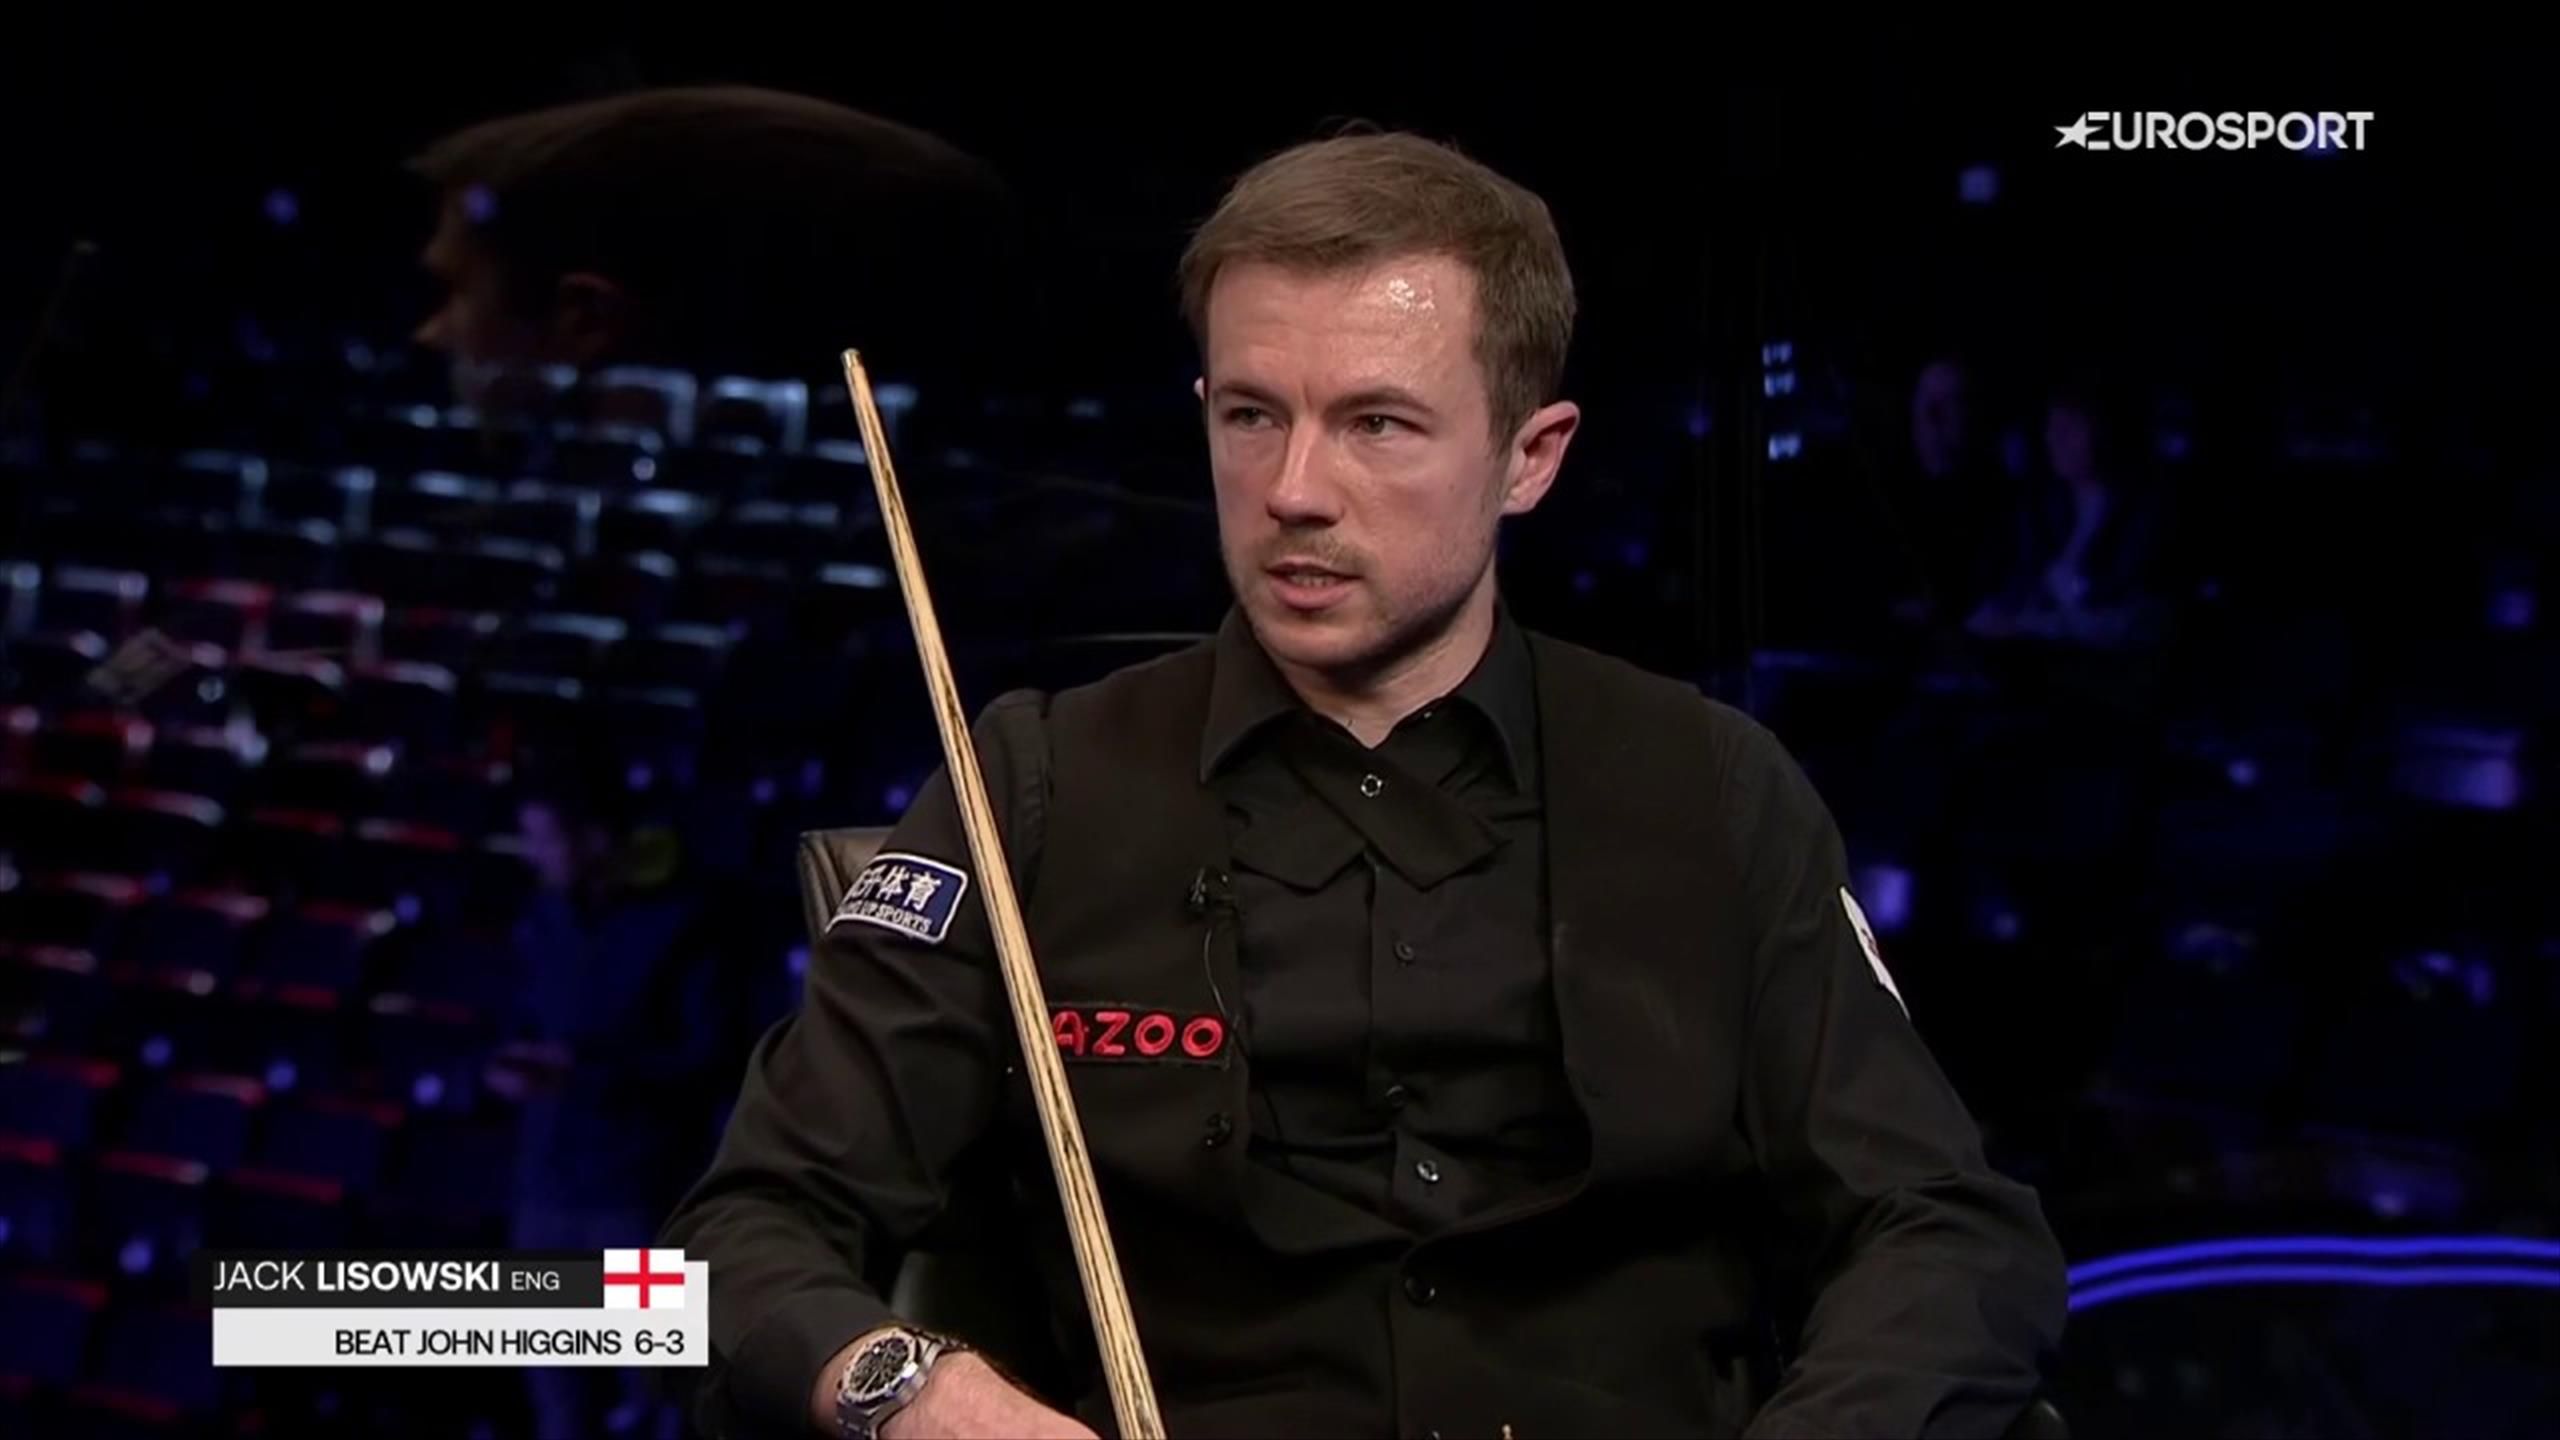 A mental thing - Jack Lisowski on his Masters improvement after win over John Higgins - Snooker video